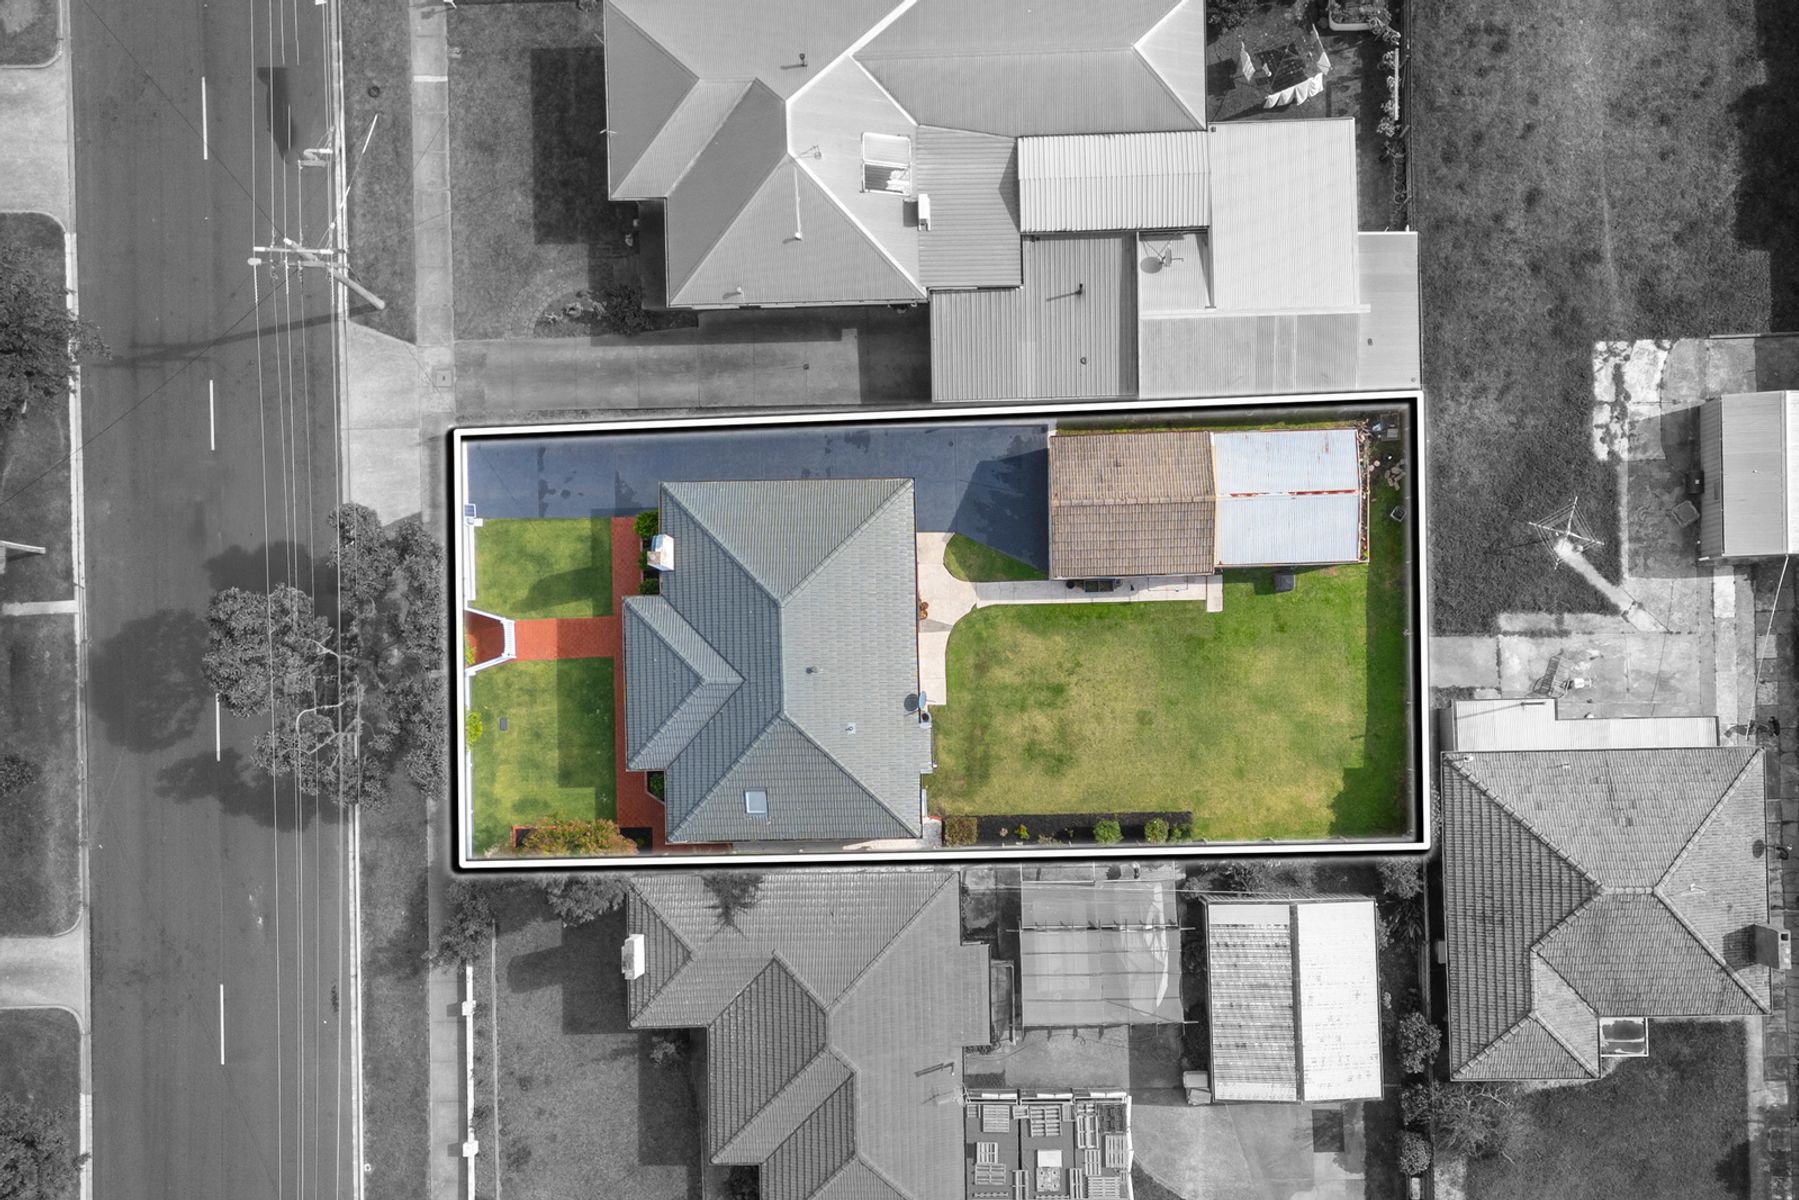 032 Open2view ID878653 44 Henry Street   Traralgon